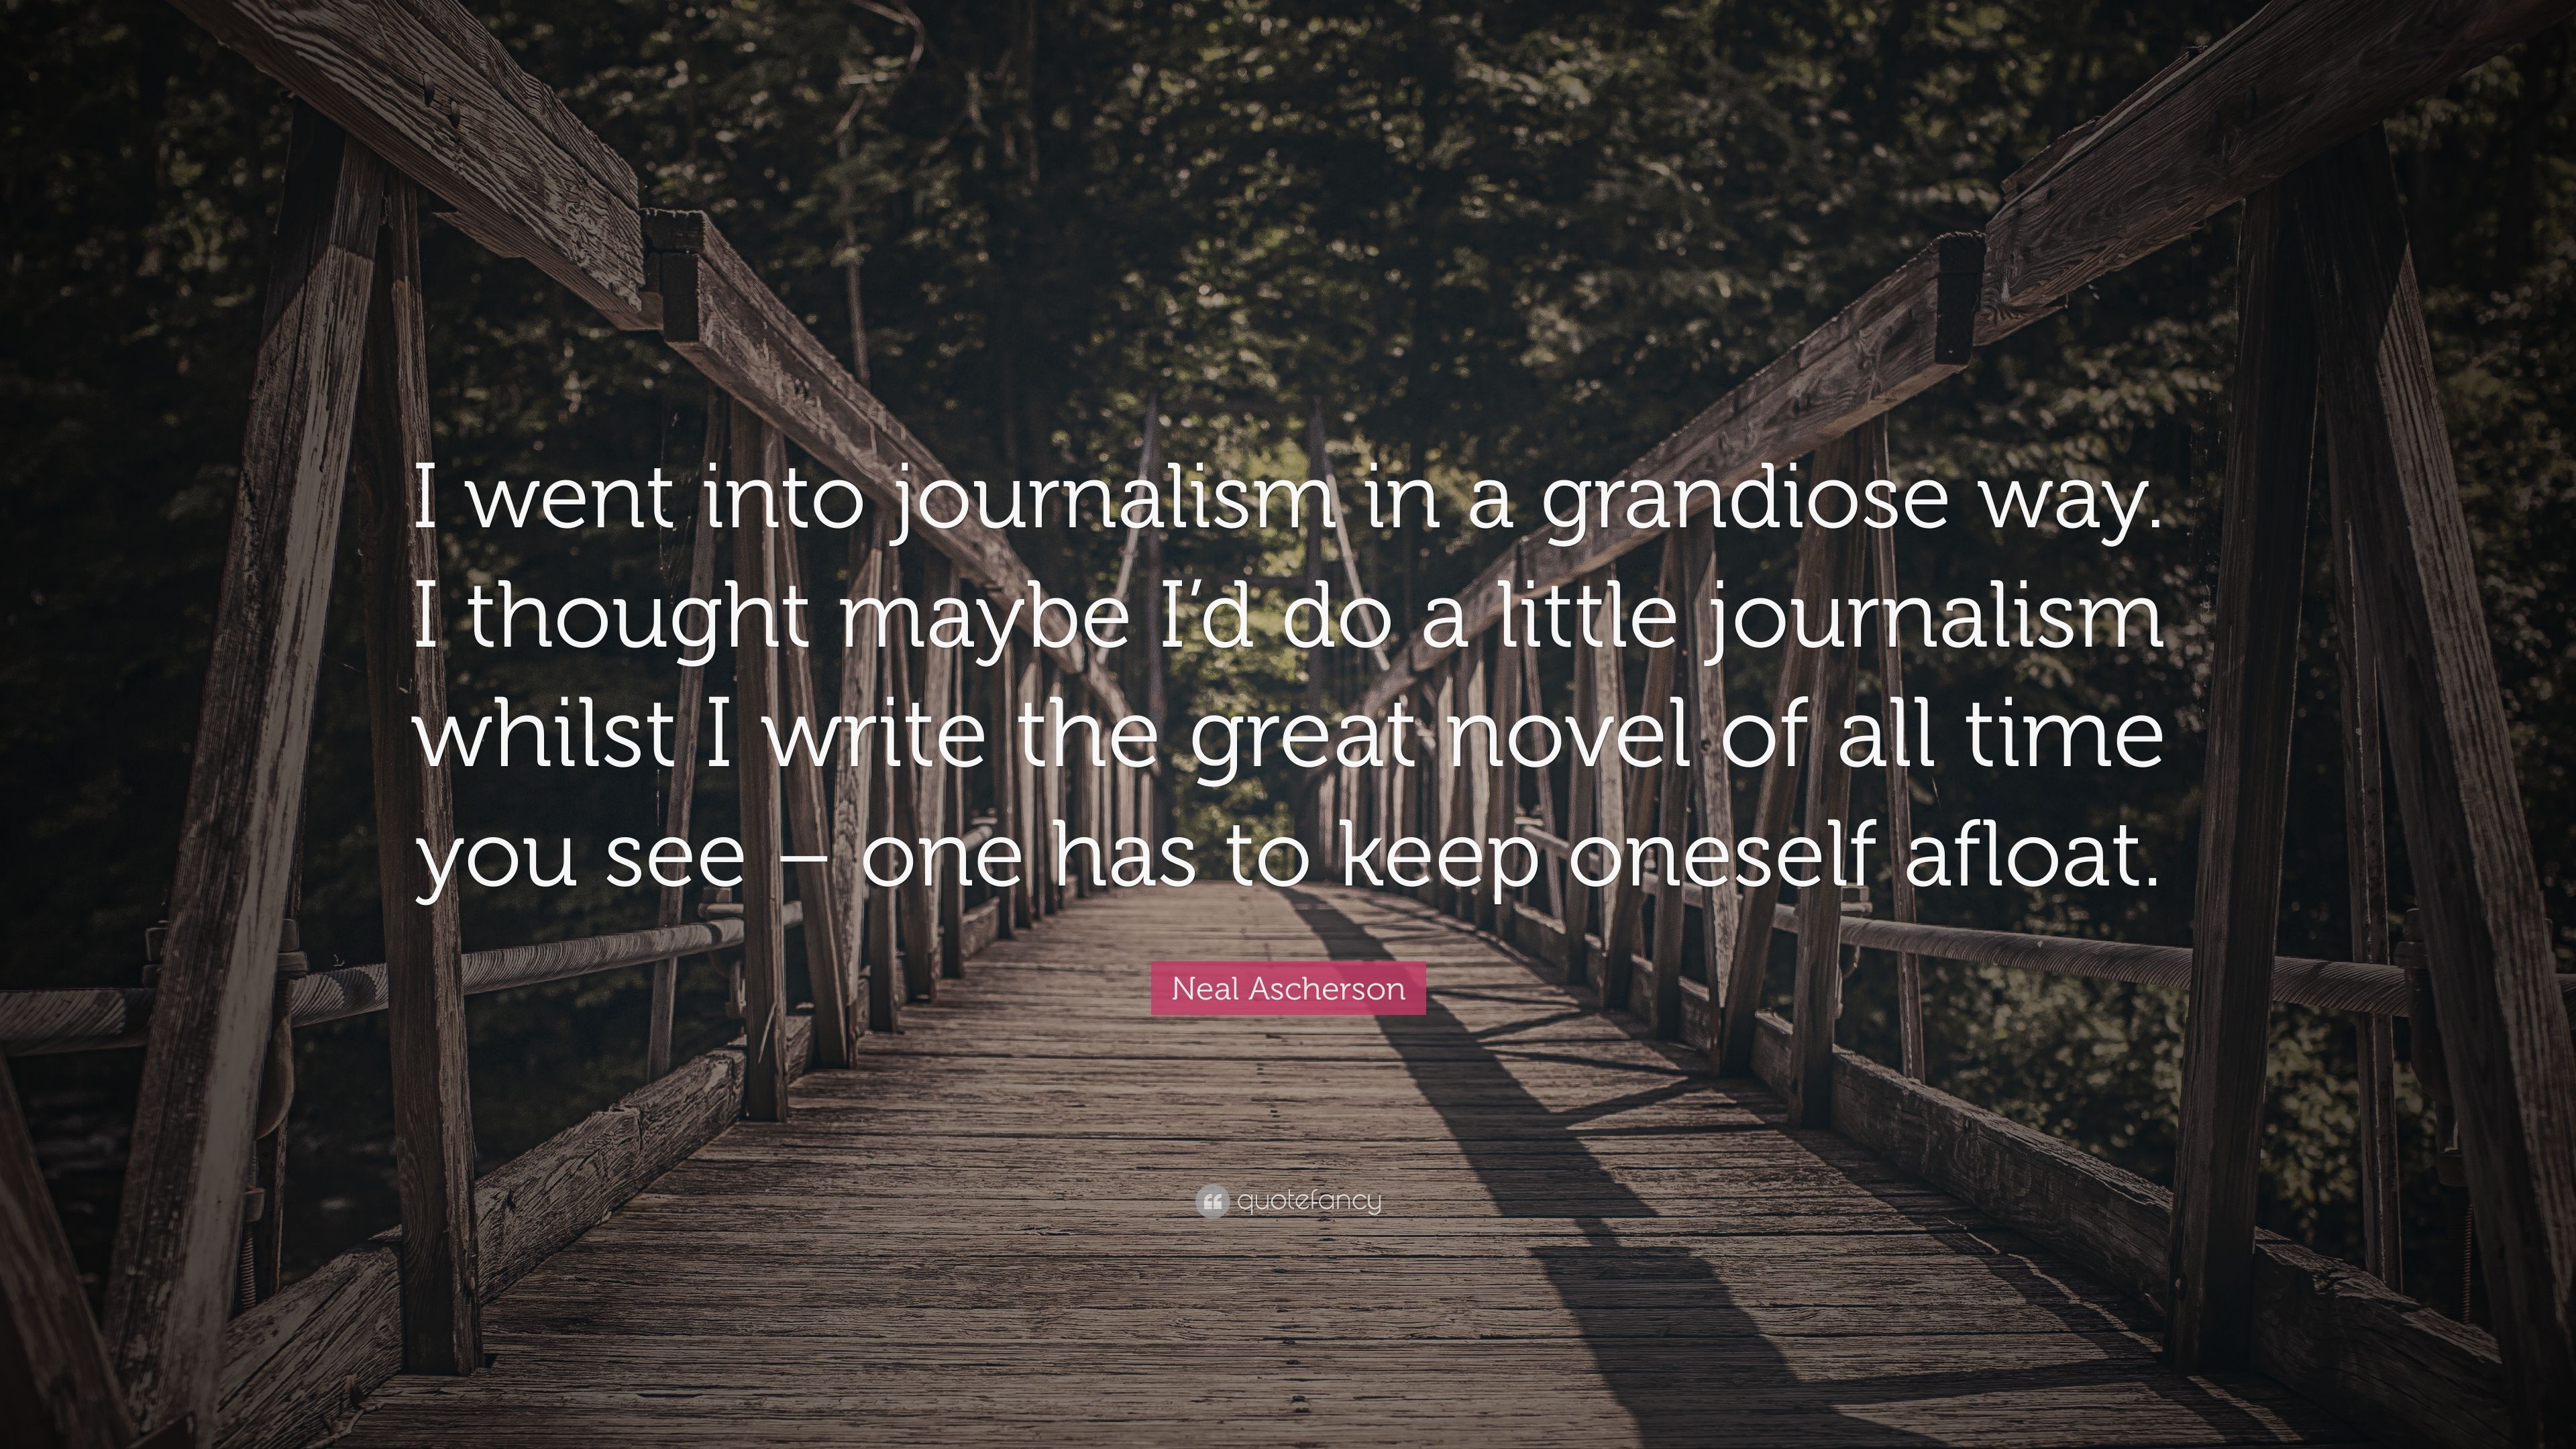 Neal Ascherson Quote: “I went into journalism in a grandiose way. I thought maybe I'd do a little journalism whilst I write the great novel” (7 wallpaper)